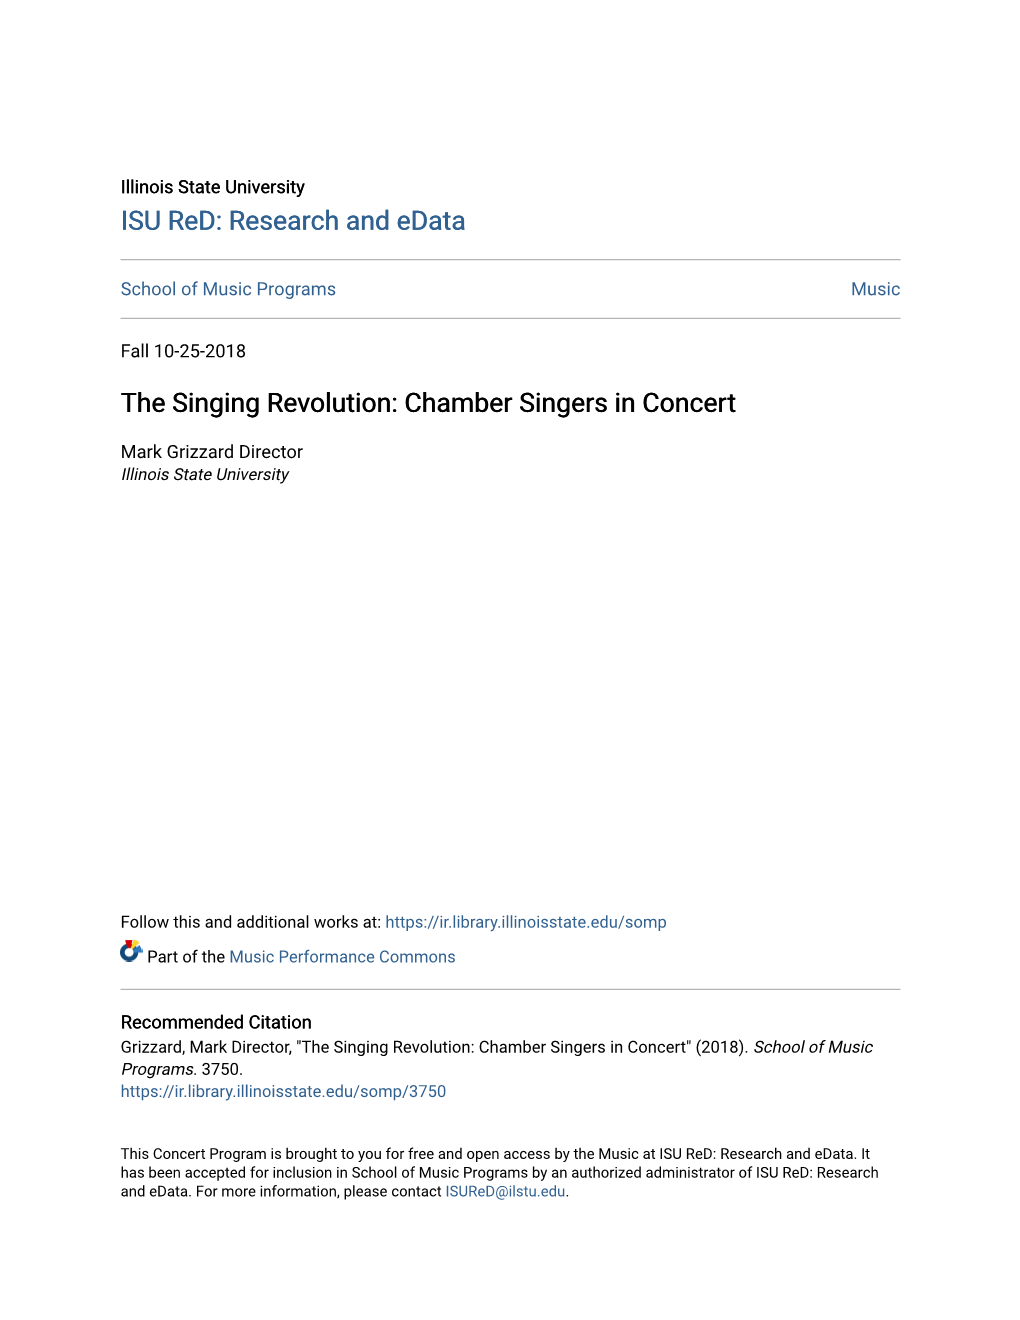 The Singing Revolution: Chamber Singers in Concert